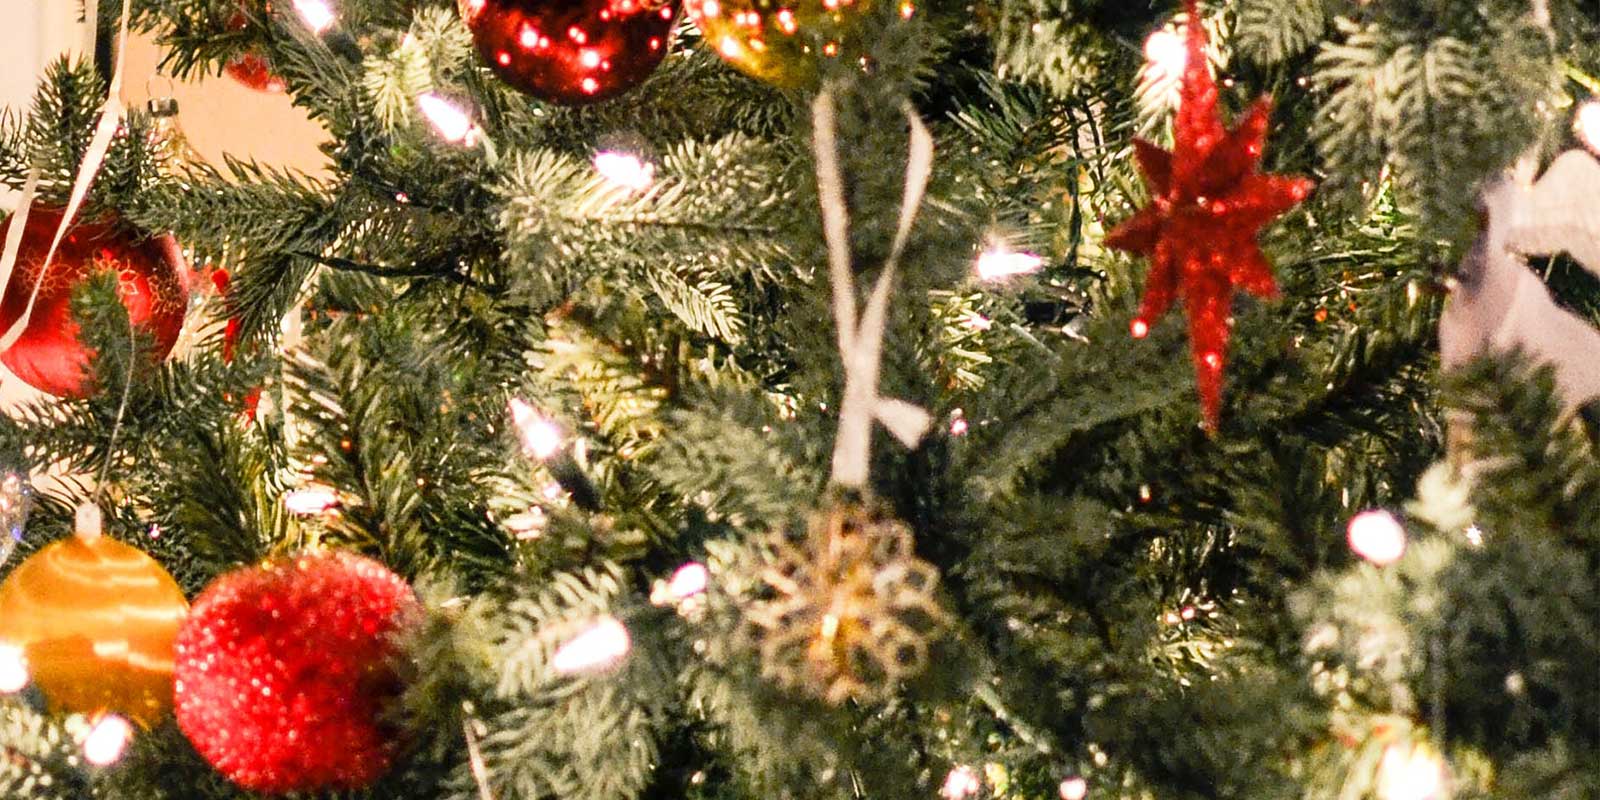 Close up of Christmas tree ornaments and lights